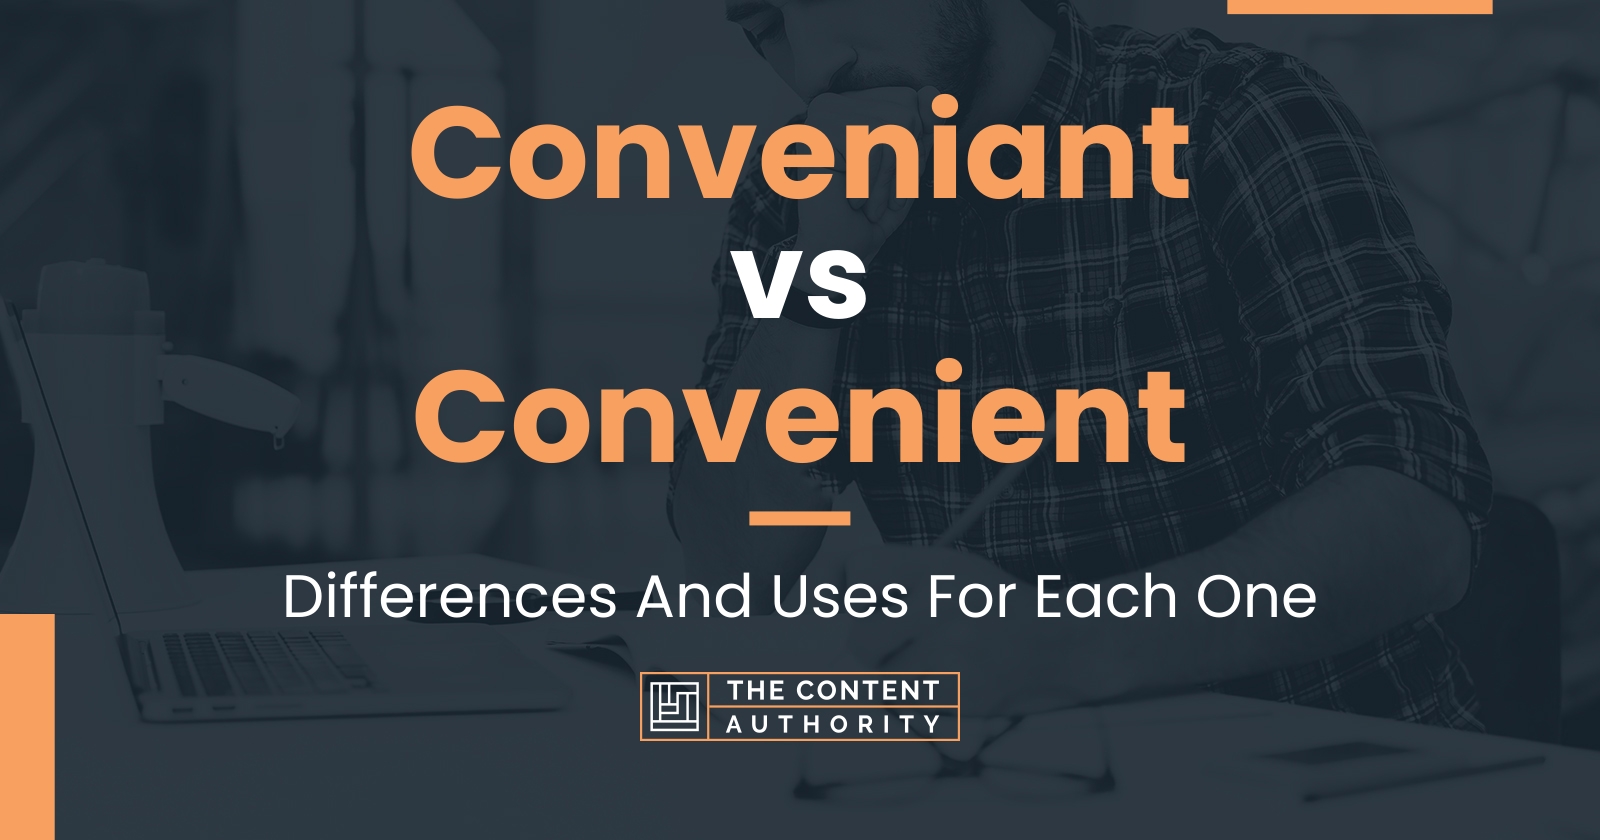 Conveniant vs Convenient: Differences And Uses For Each One